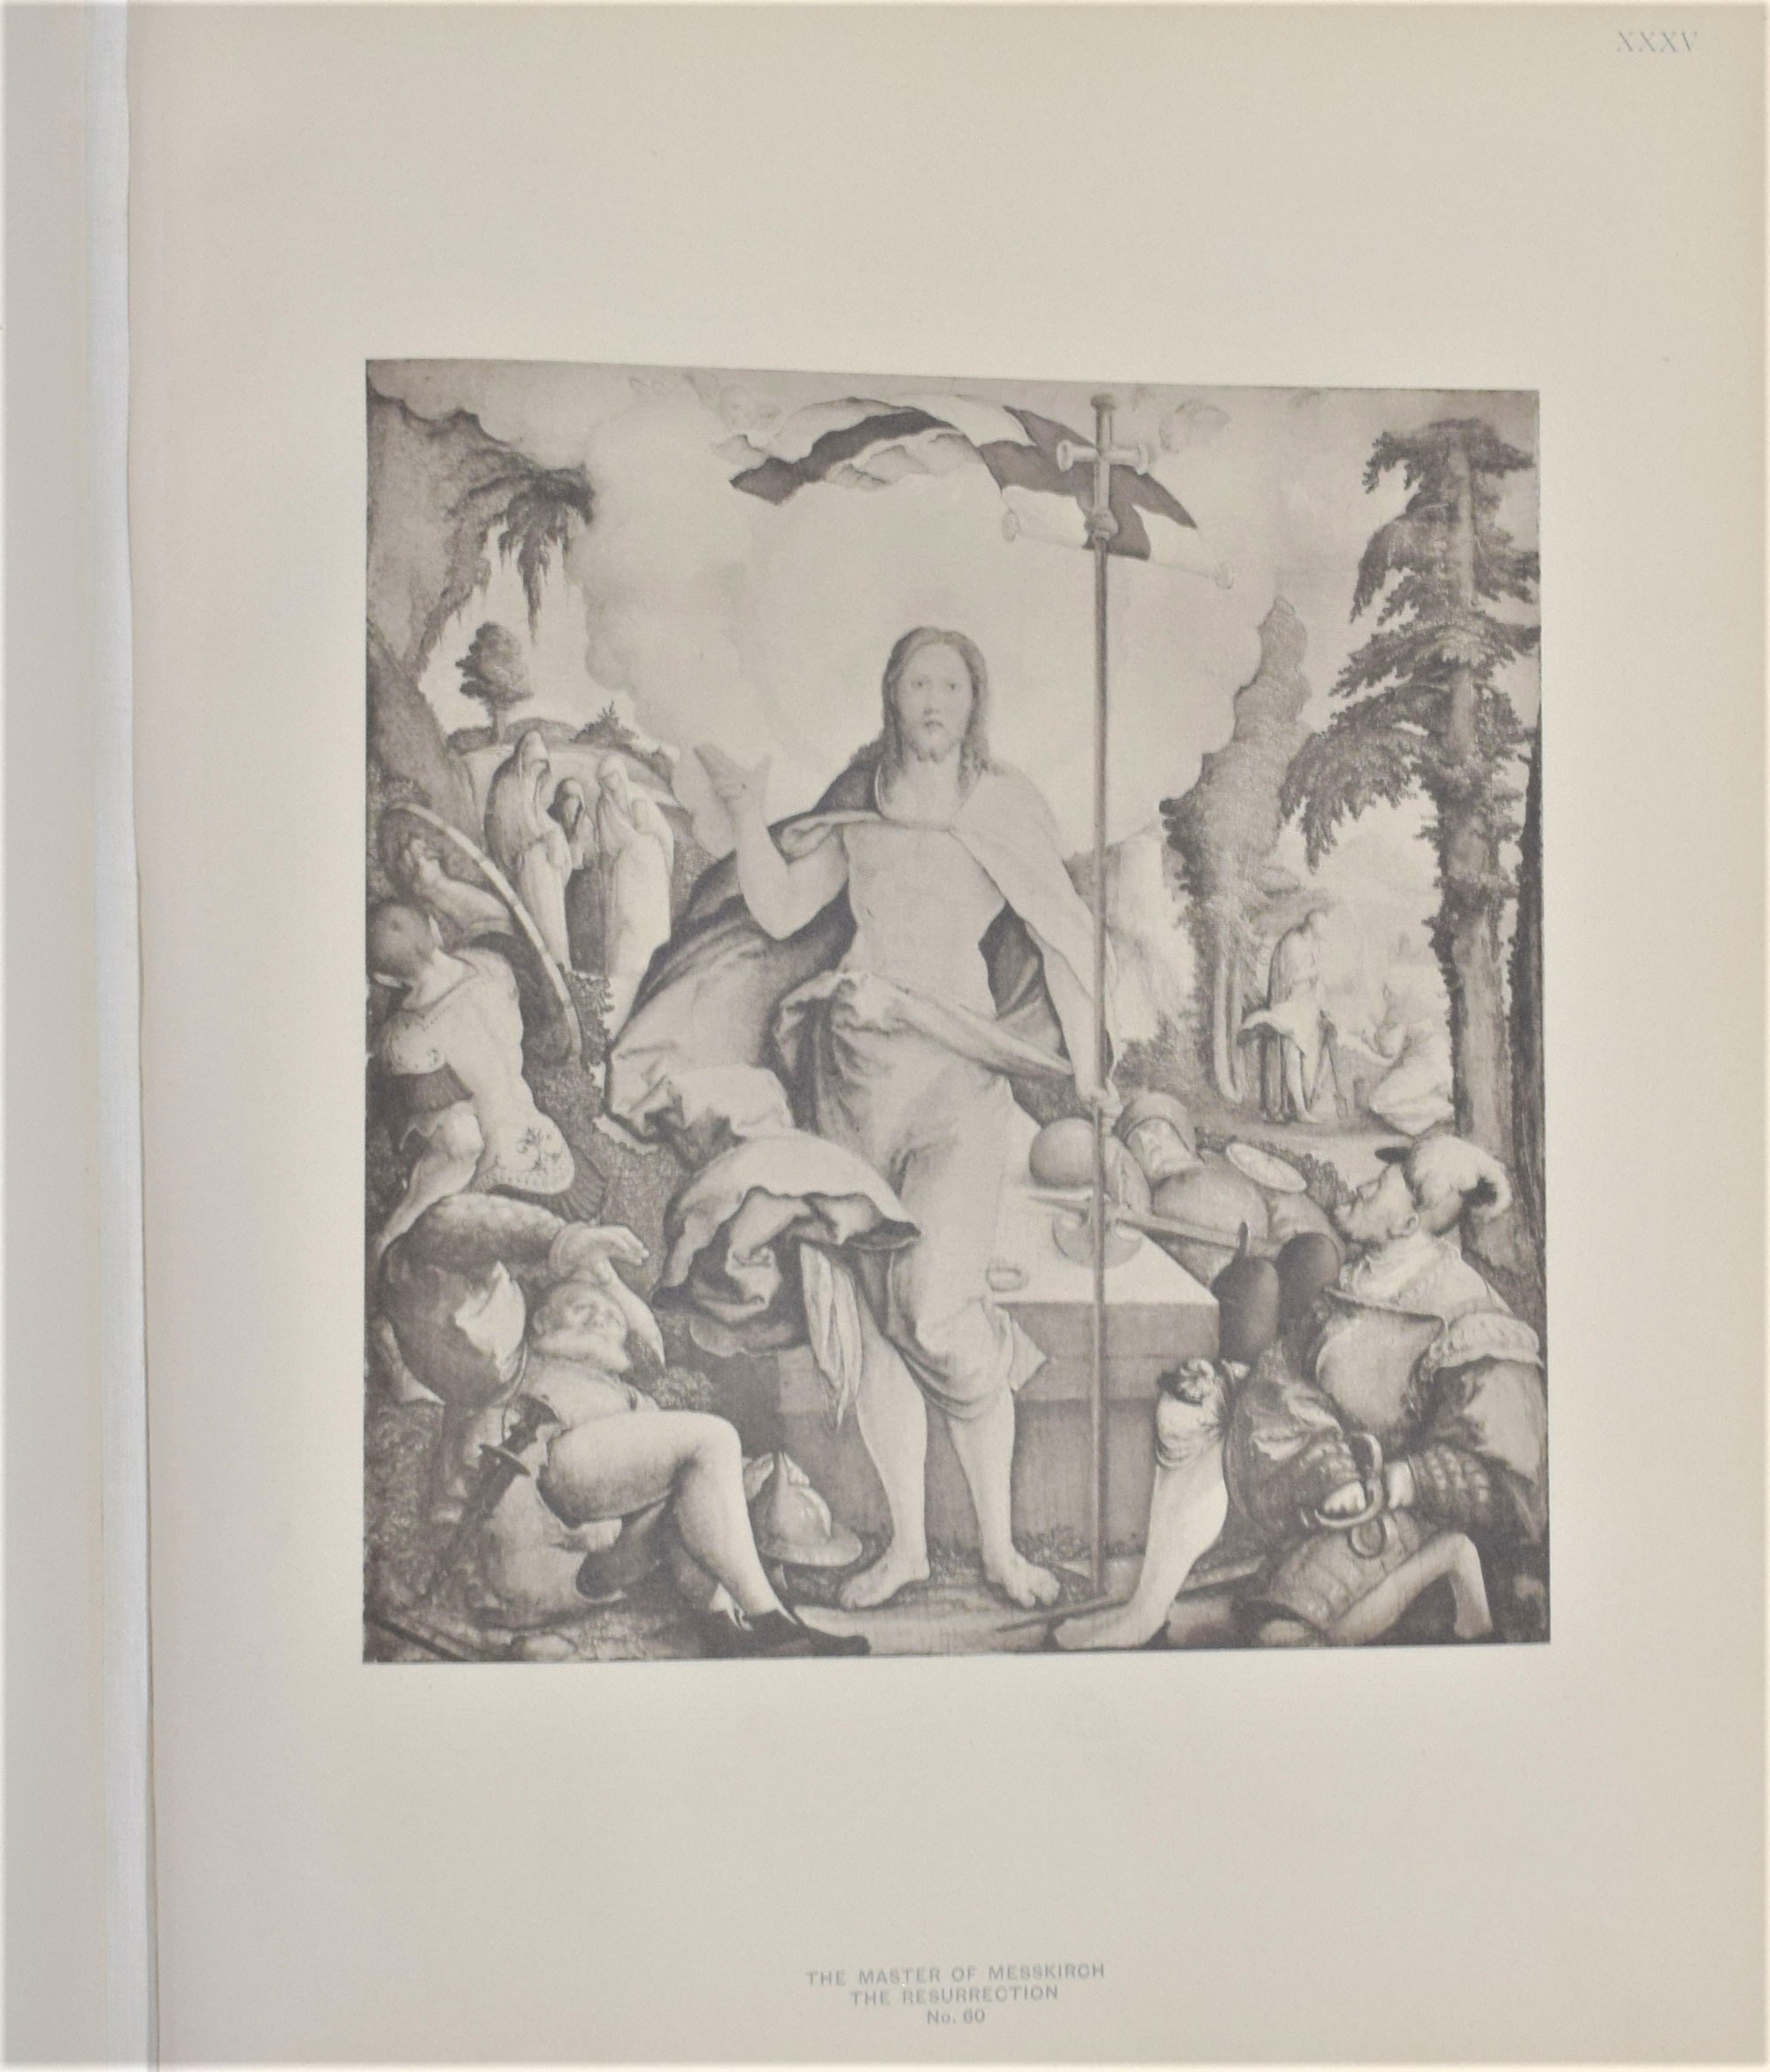 Illustrated Catalogue of Early German Art